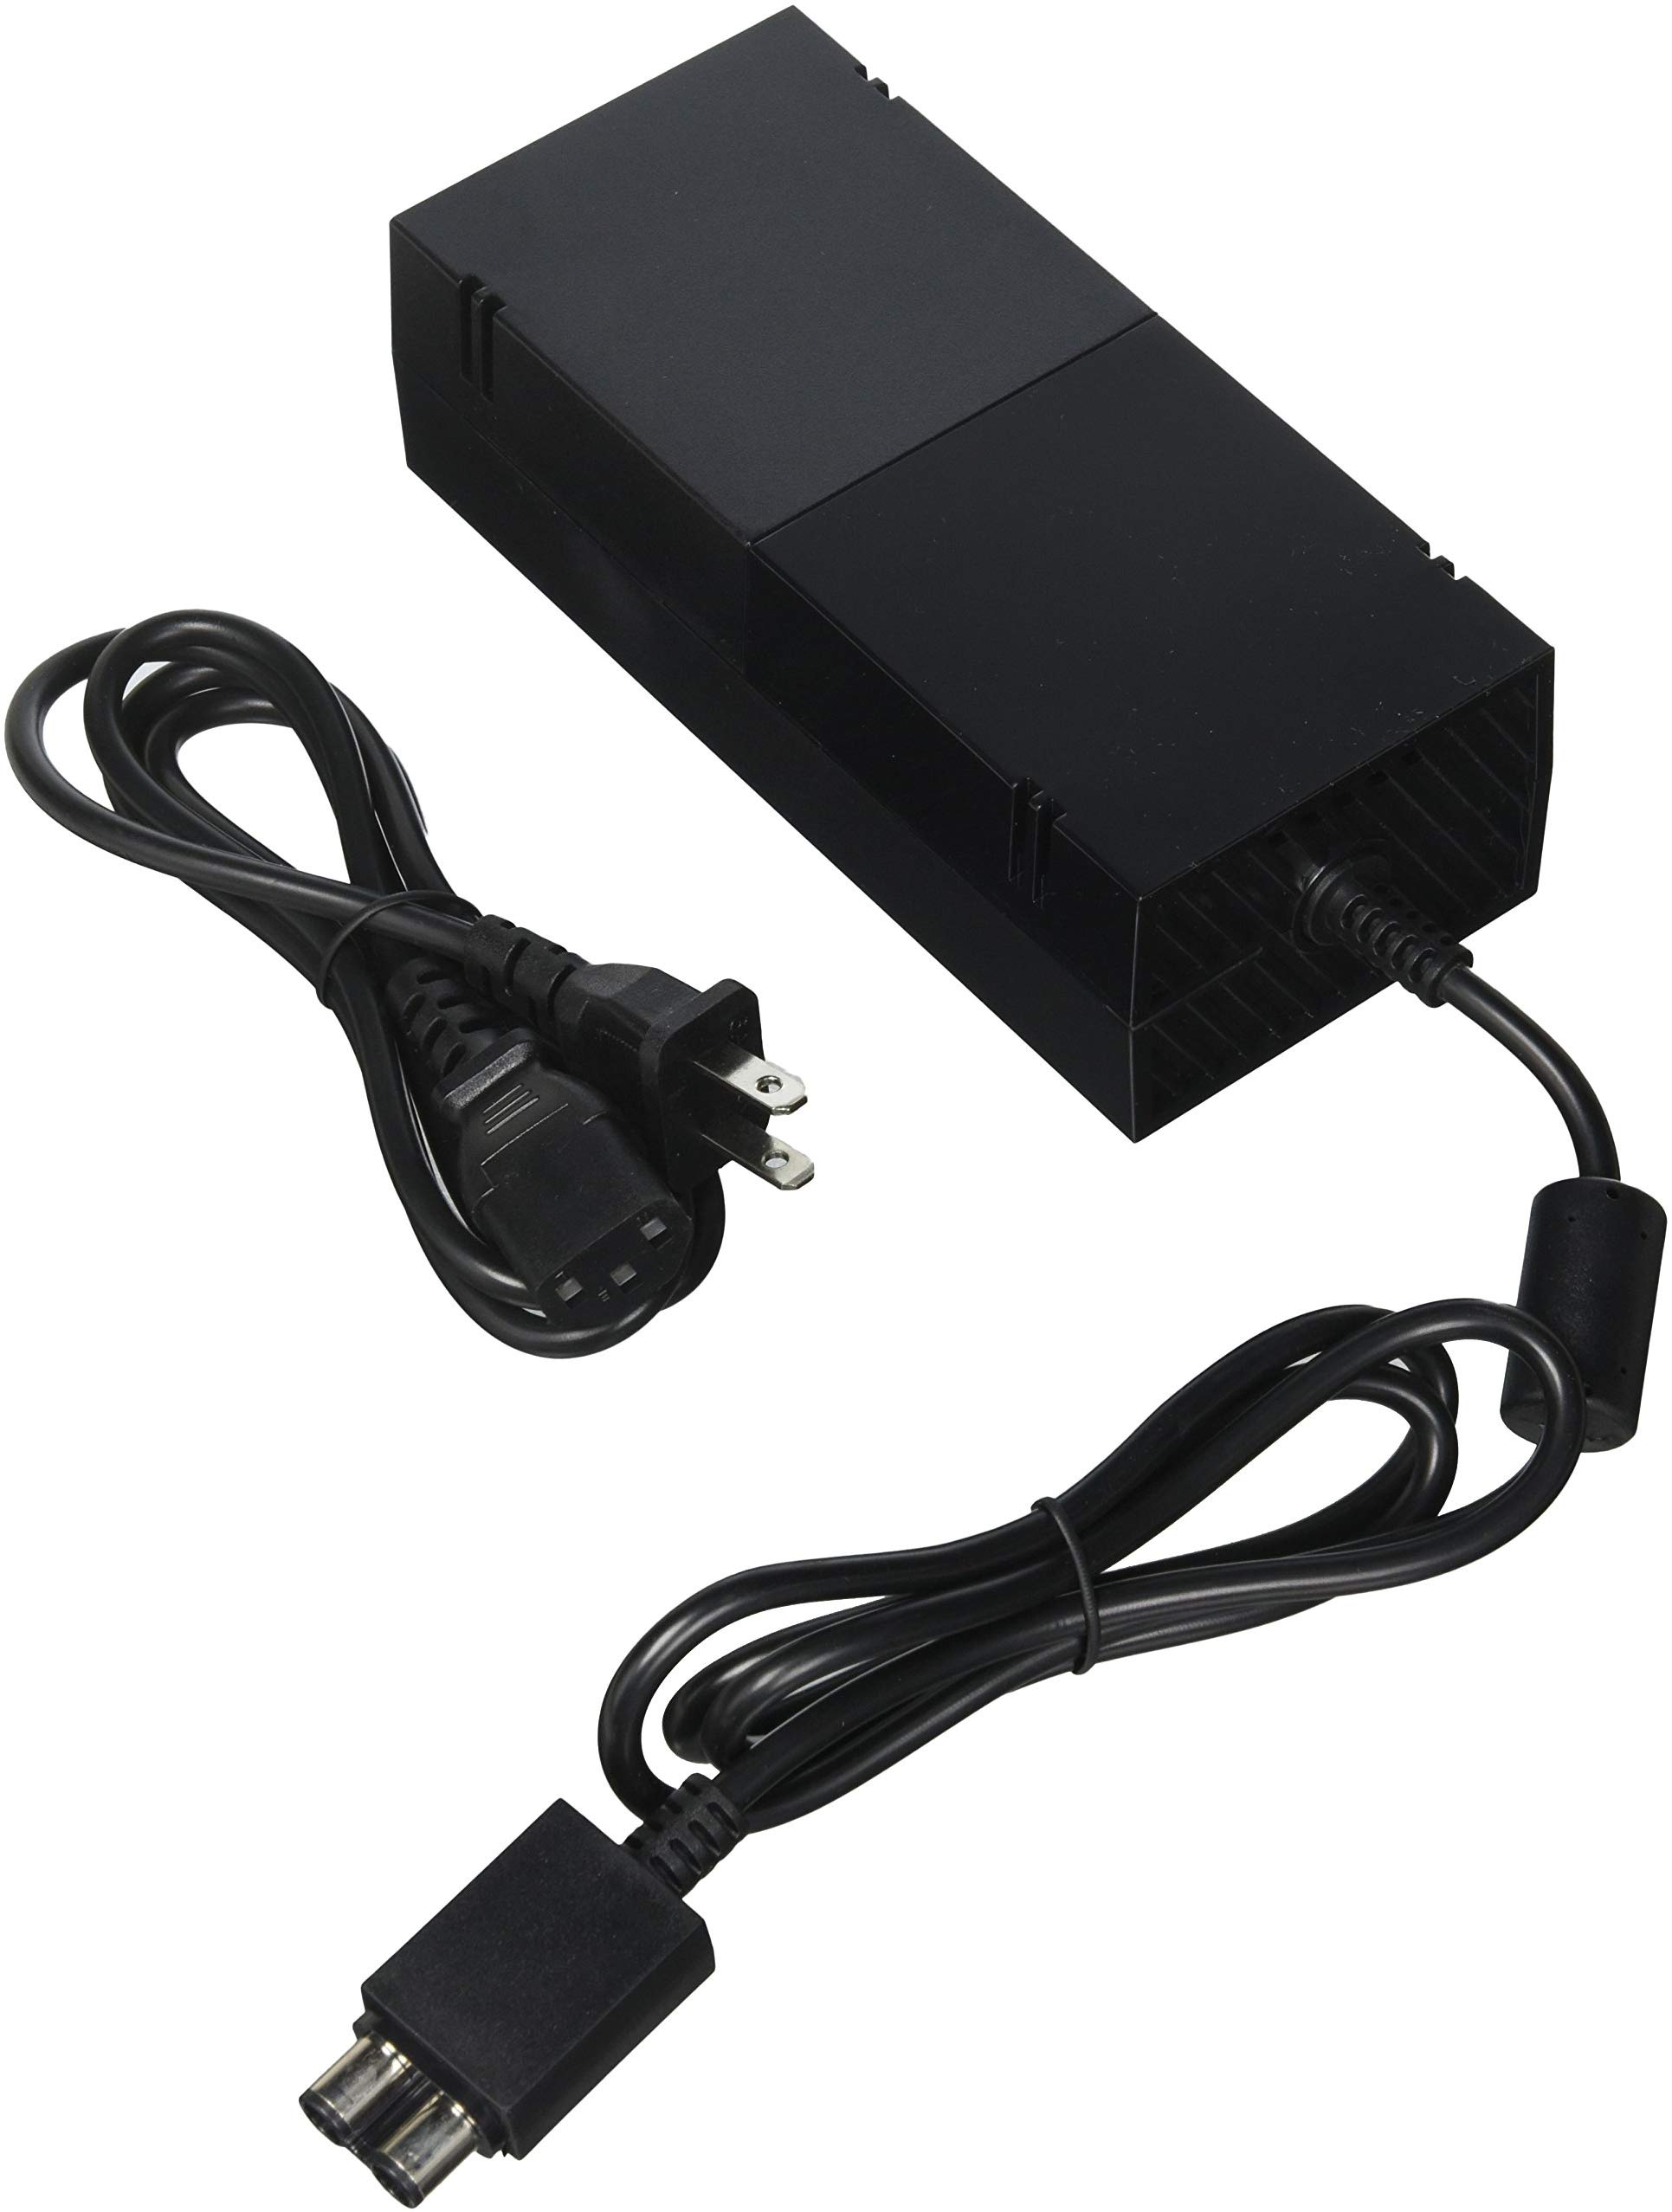 ROCKSOUL Xbox One Power Supply, Advanced Quiet & Latest Version Xbox One AC Adapter